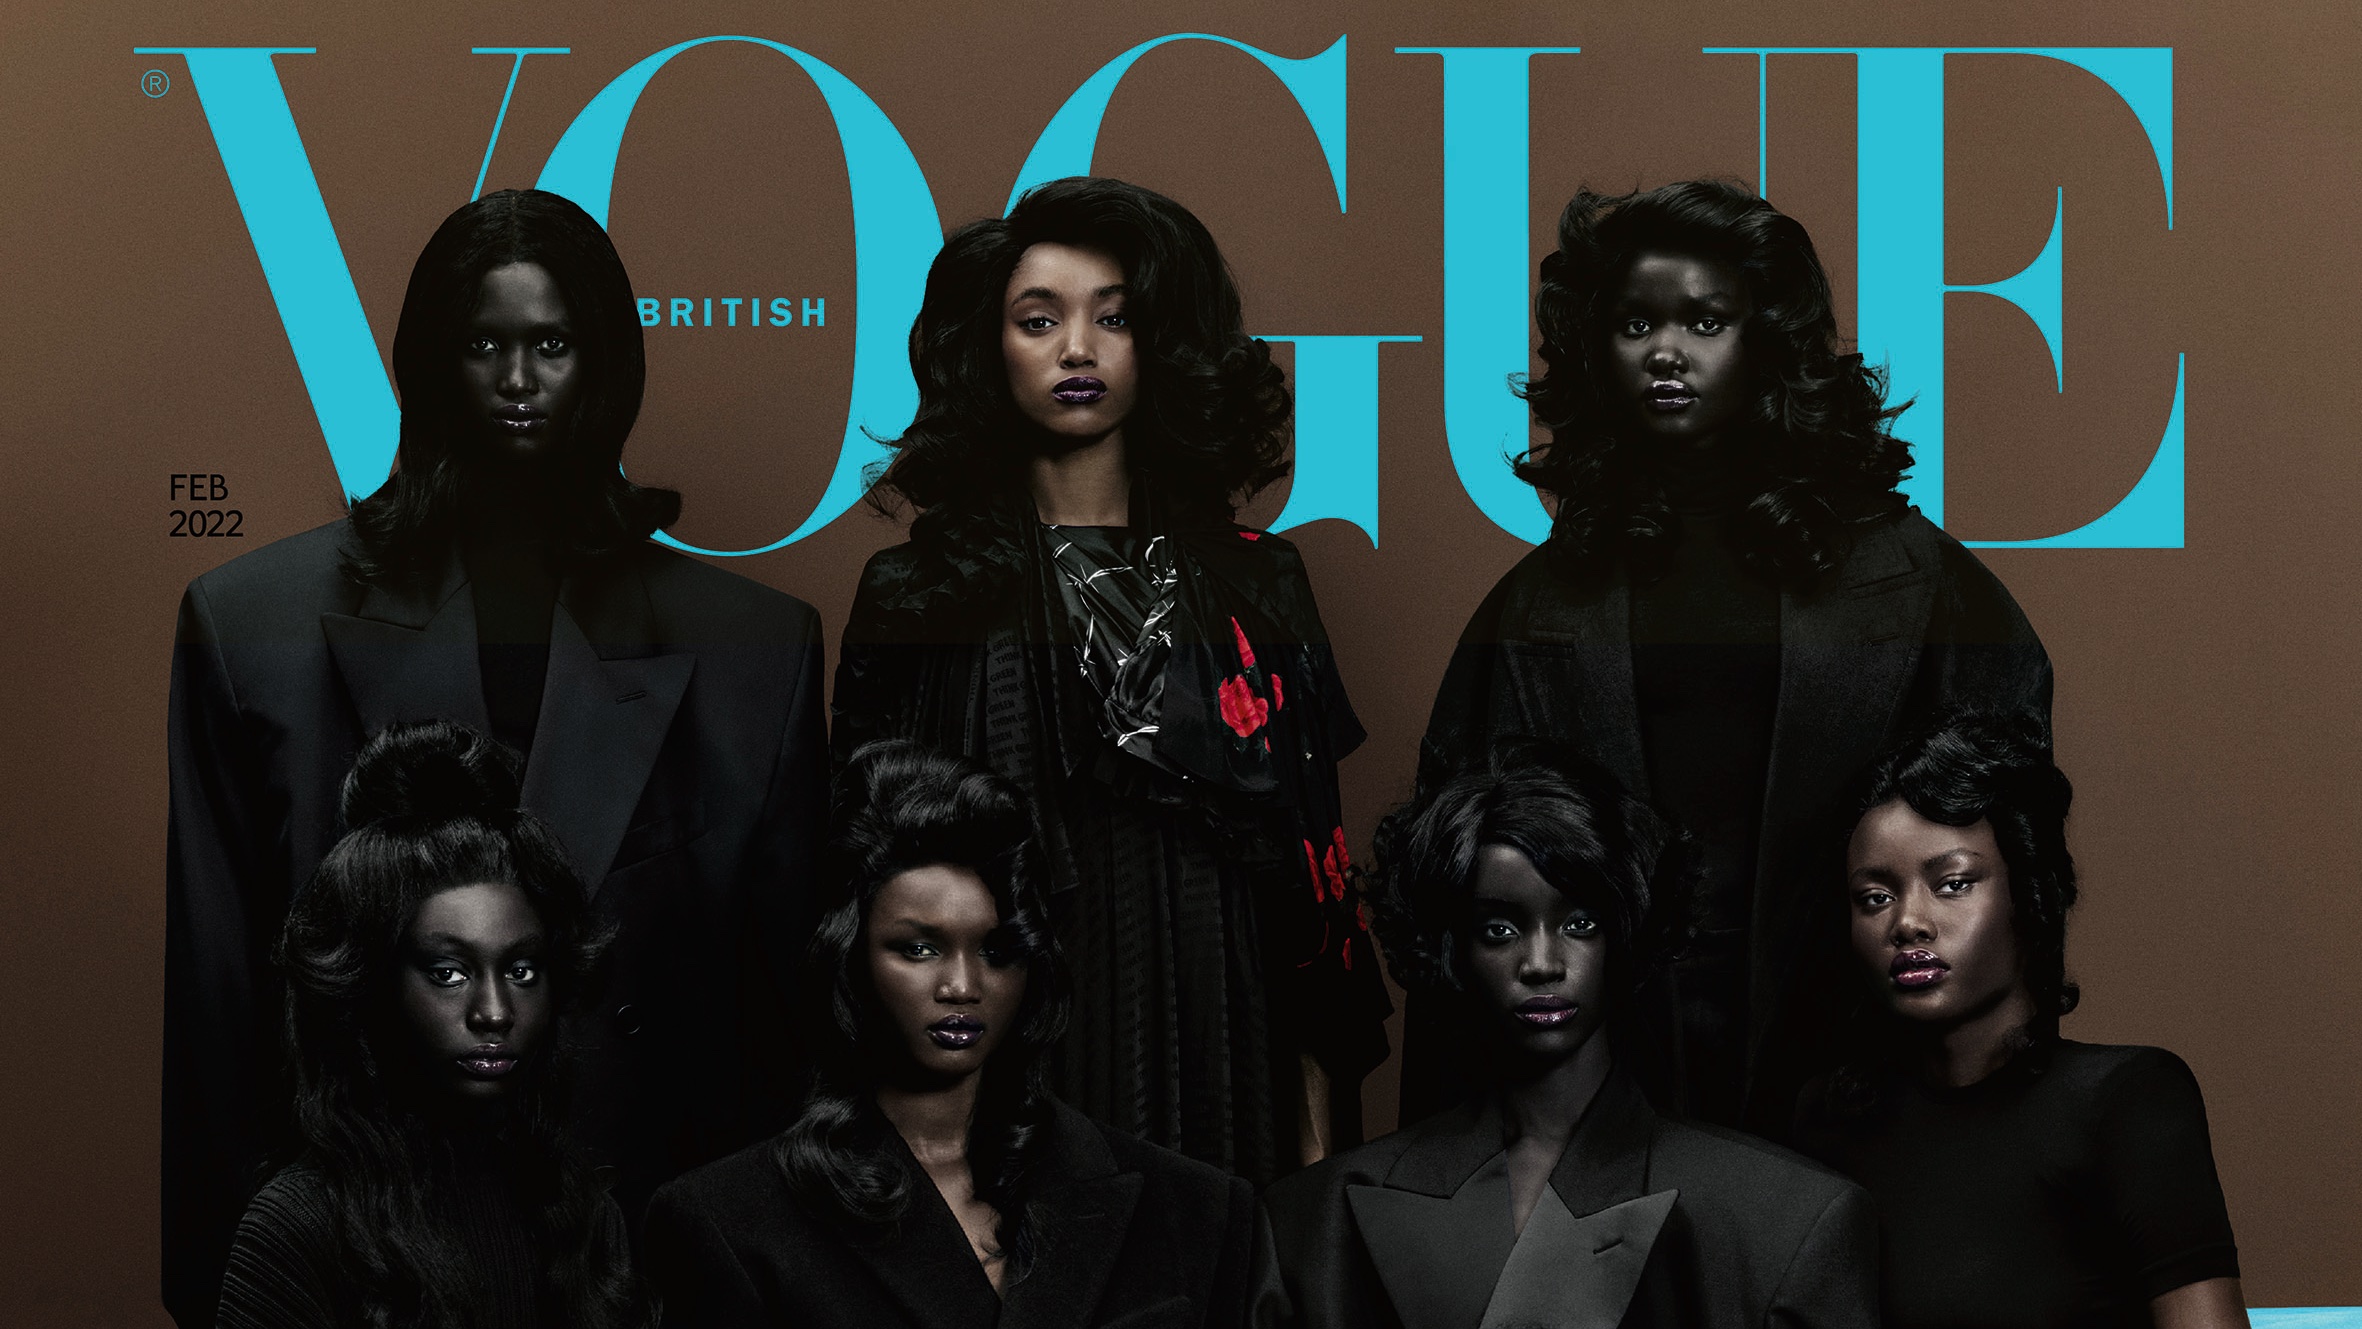 British Vogue’s Momentous All African Cover Spotlights 9 Young Women Redefining What It Is To Be A Model